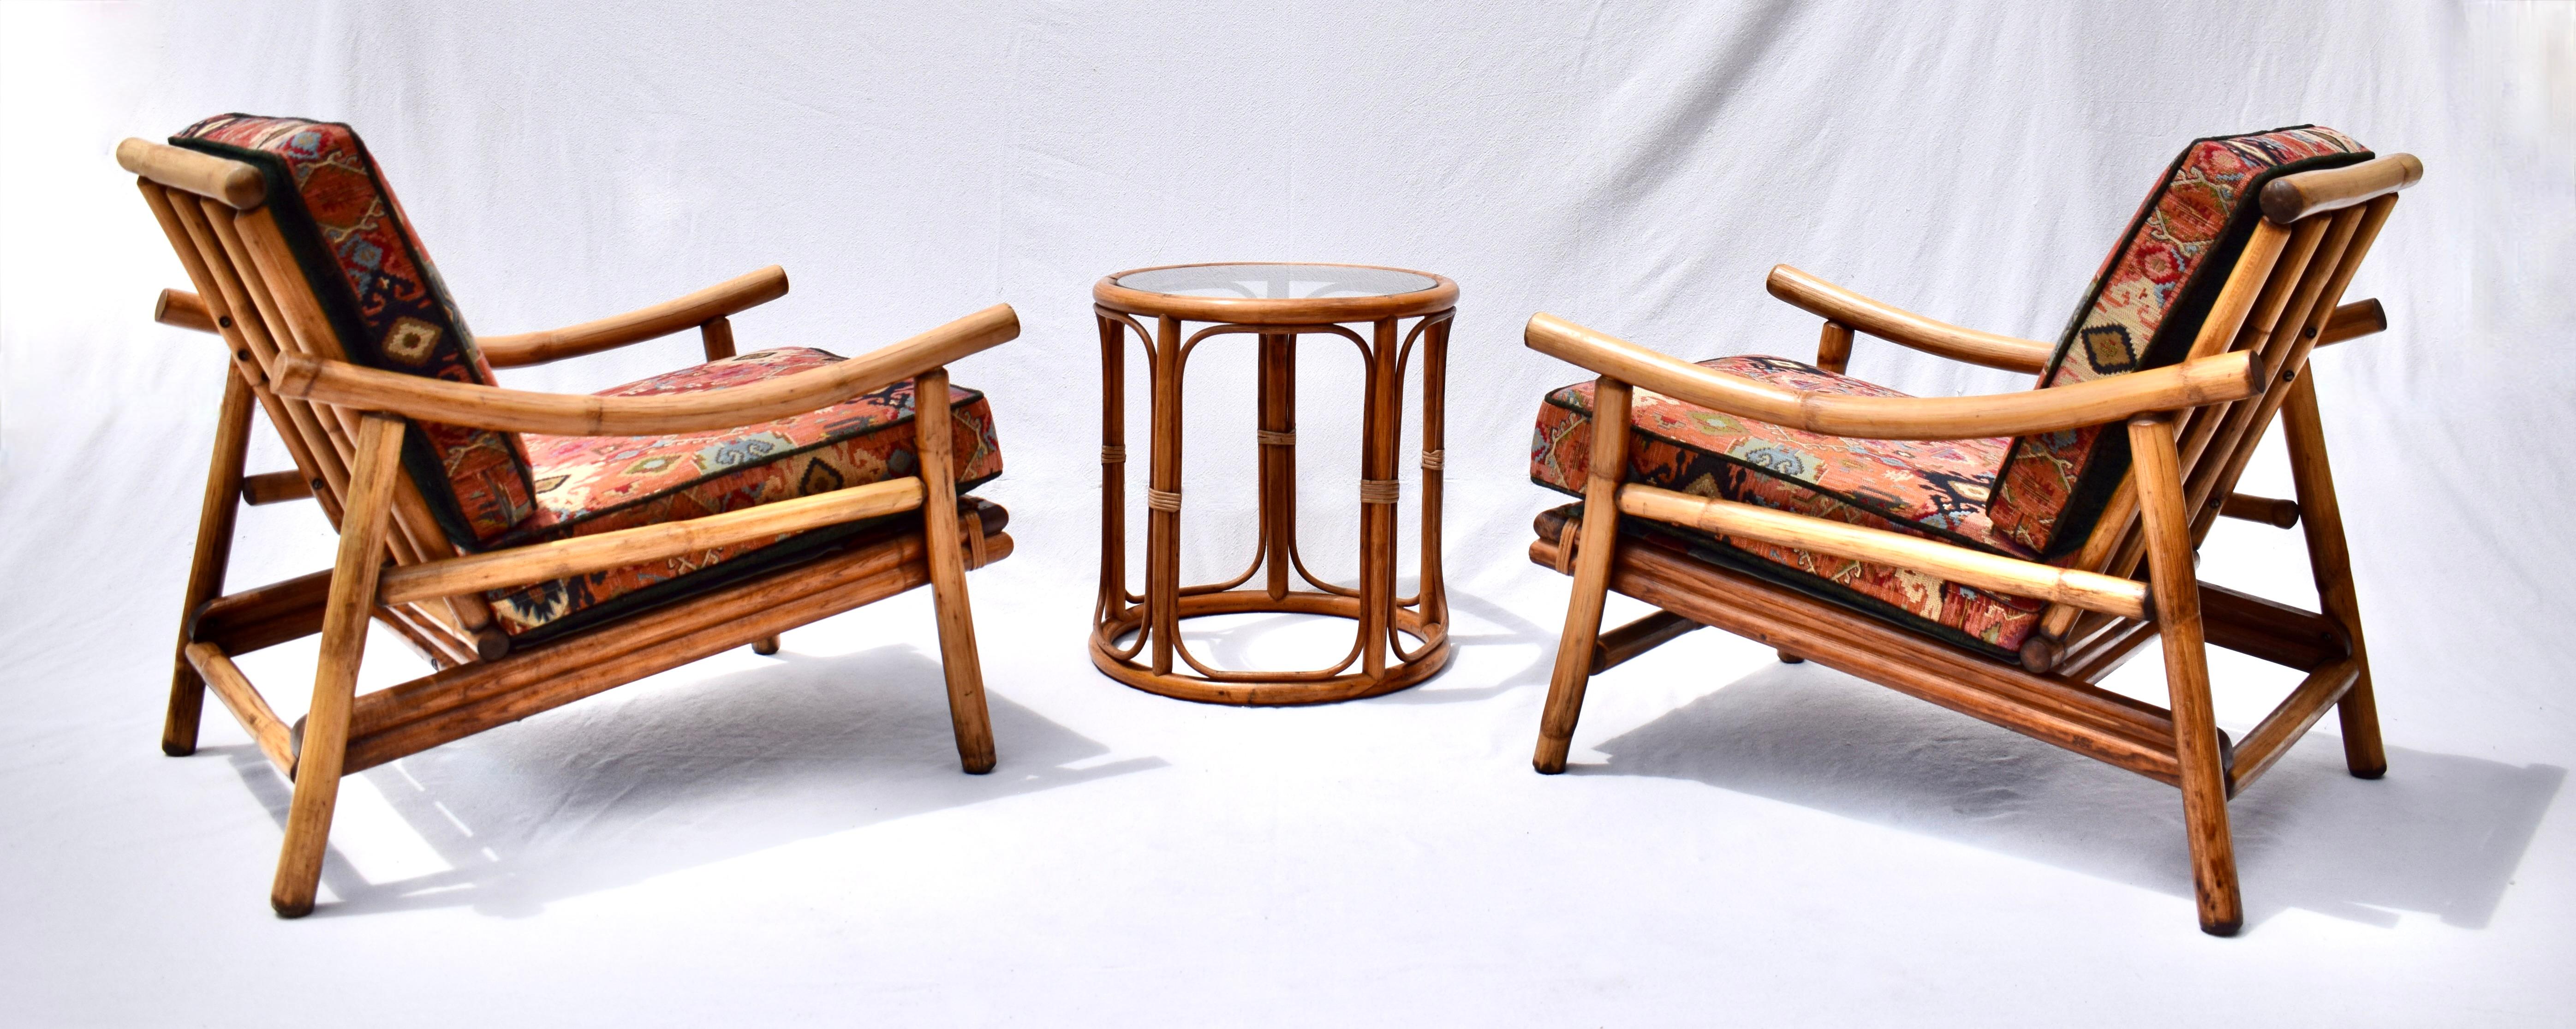 Ficks Reed Pagoda Rattan Chairs & Table Set In Good Condition For Sale In Southampton, NJ